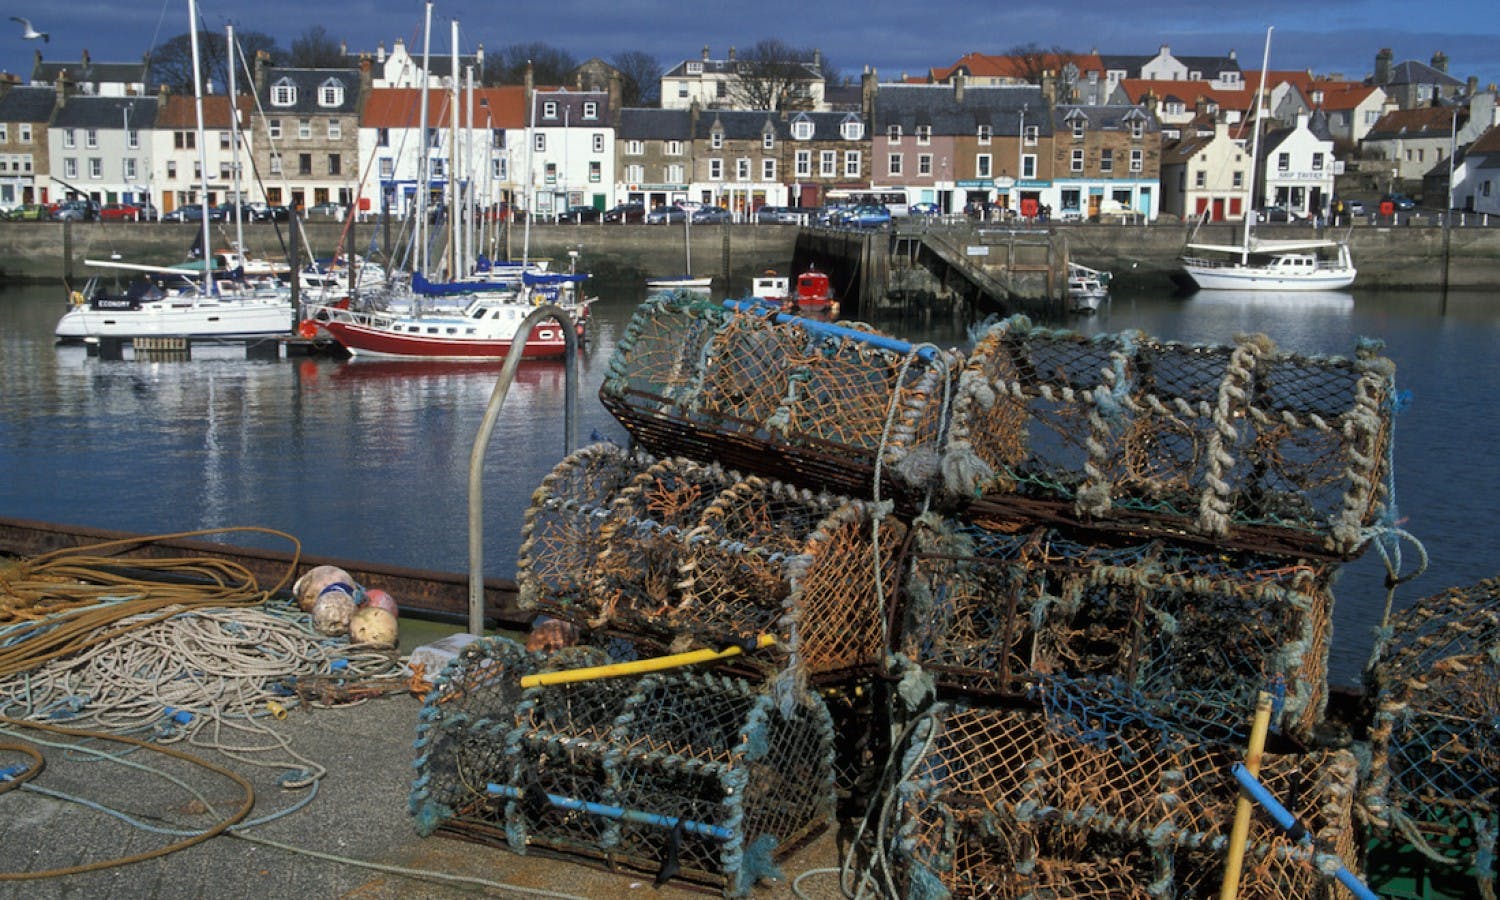 Day Trip to St Andrews & The Fishing Villages of Fife from Edinburgh